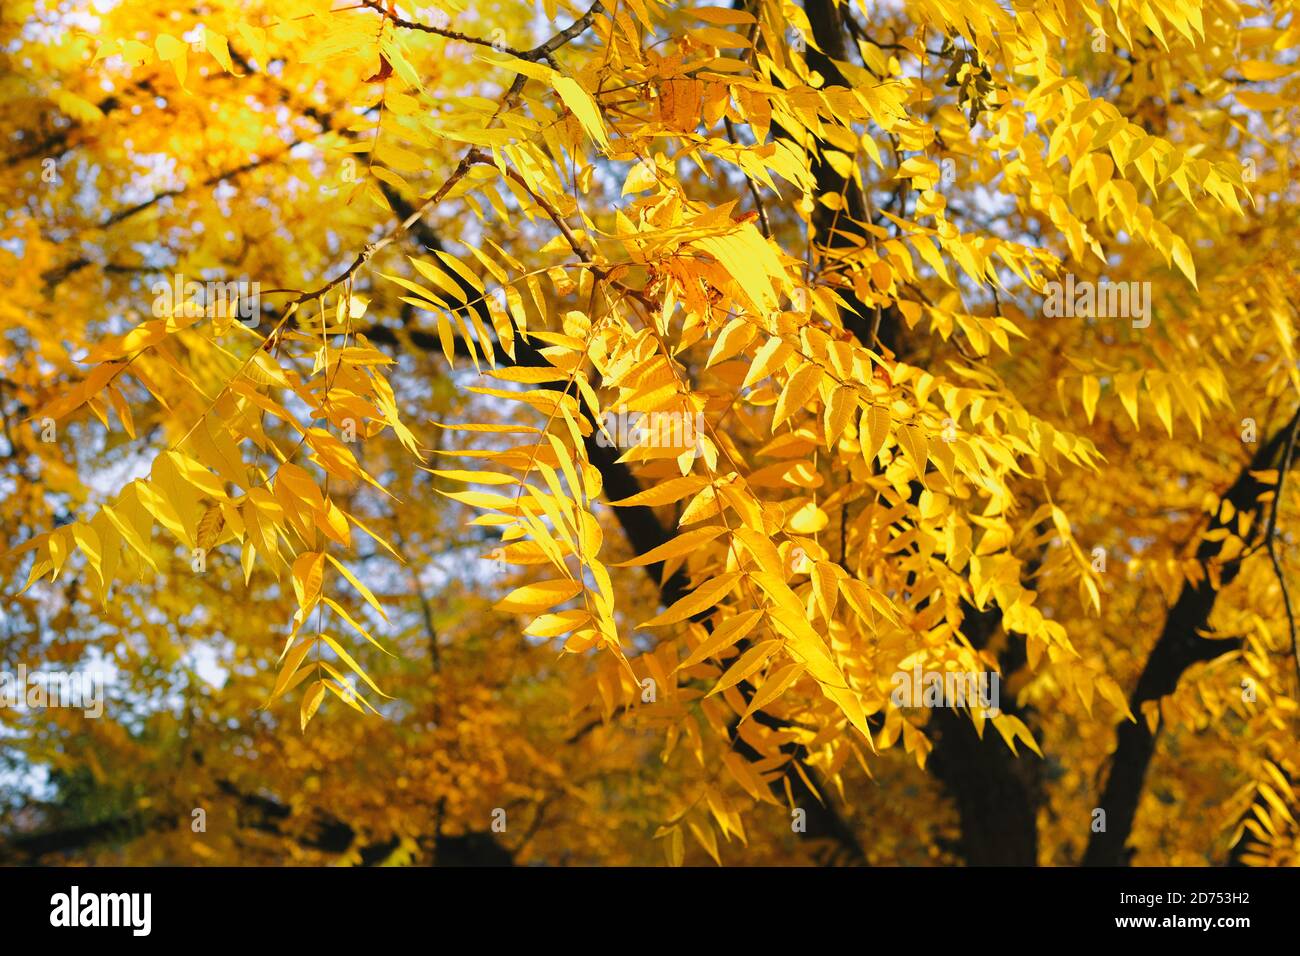 Golden autumn concept. Background image of autumn leaves perfect for seasonal use. Sunny day, warm weather. Stock Photo